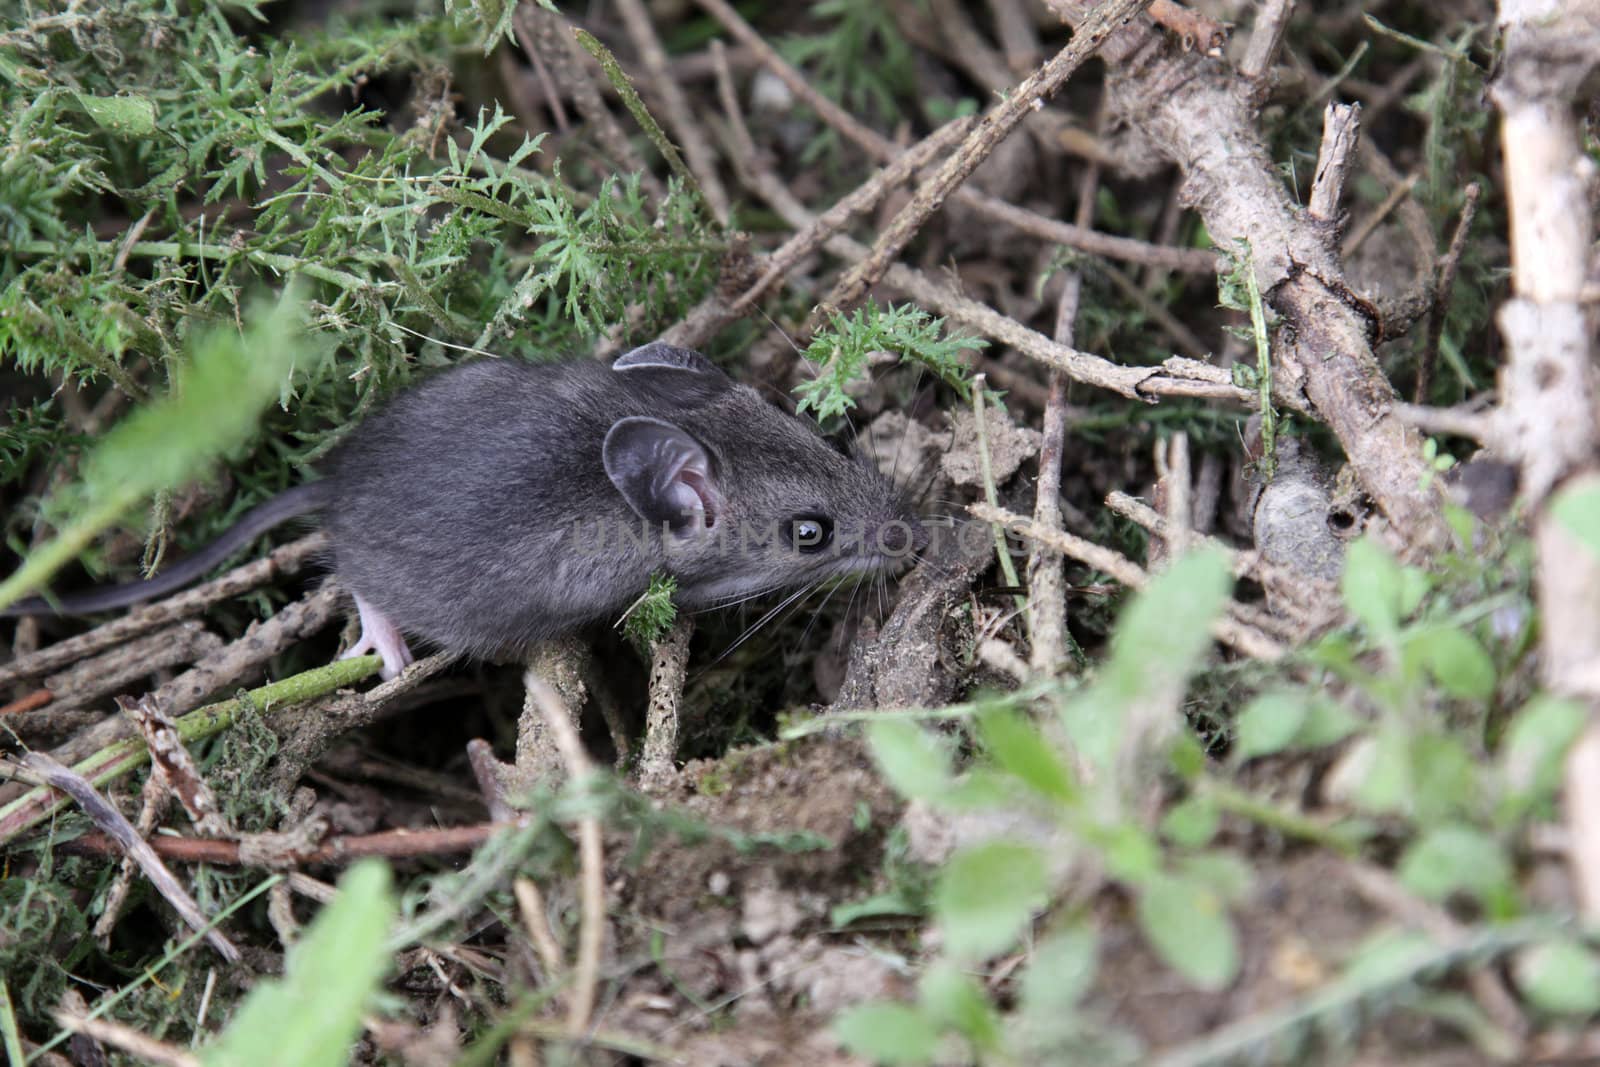 A mouse foraging on the ground.